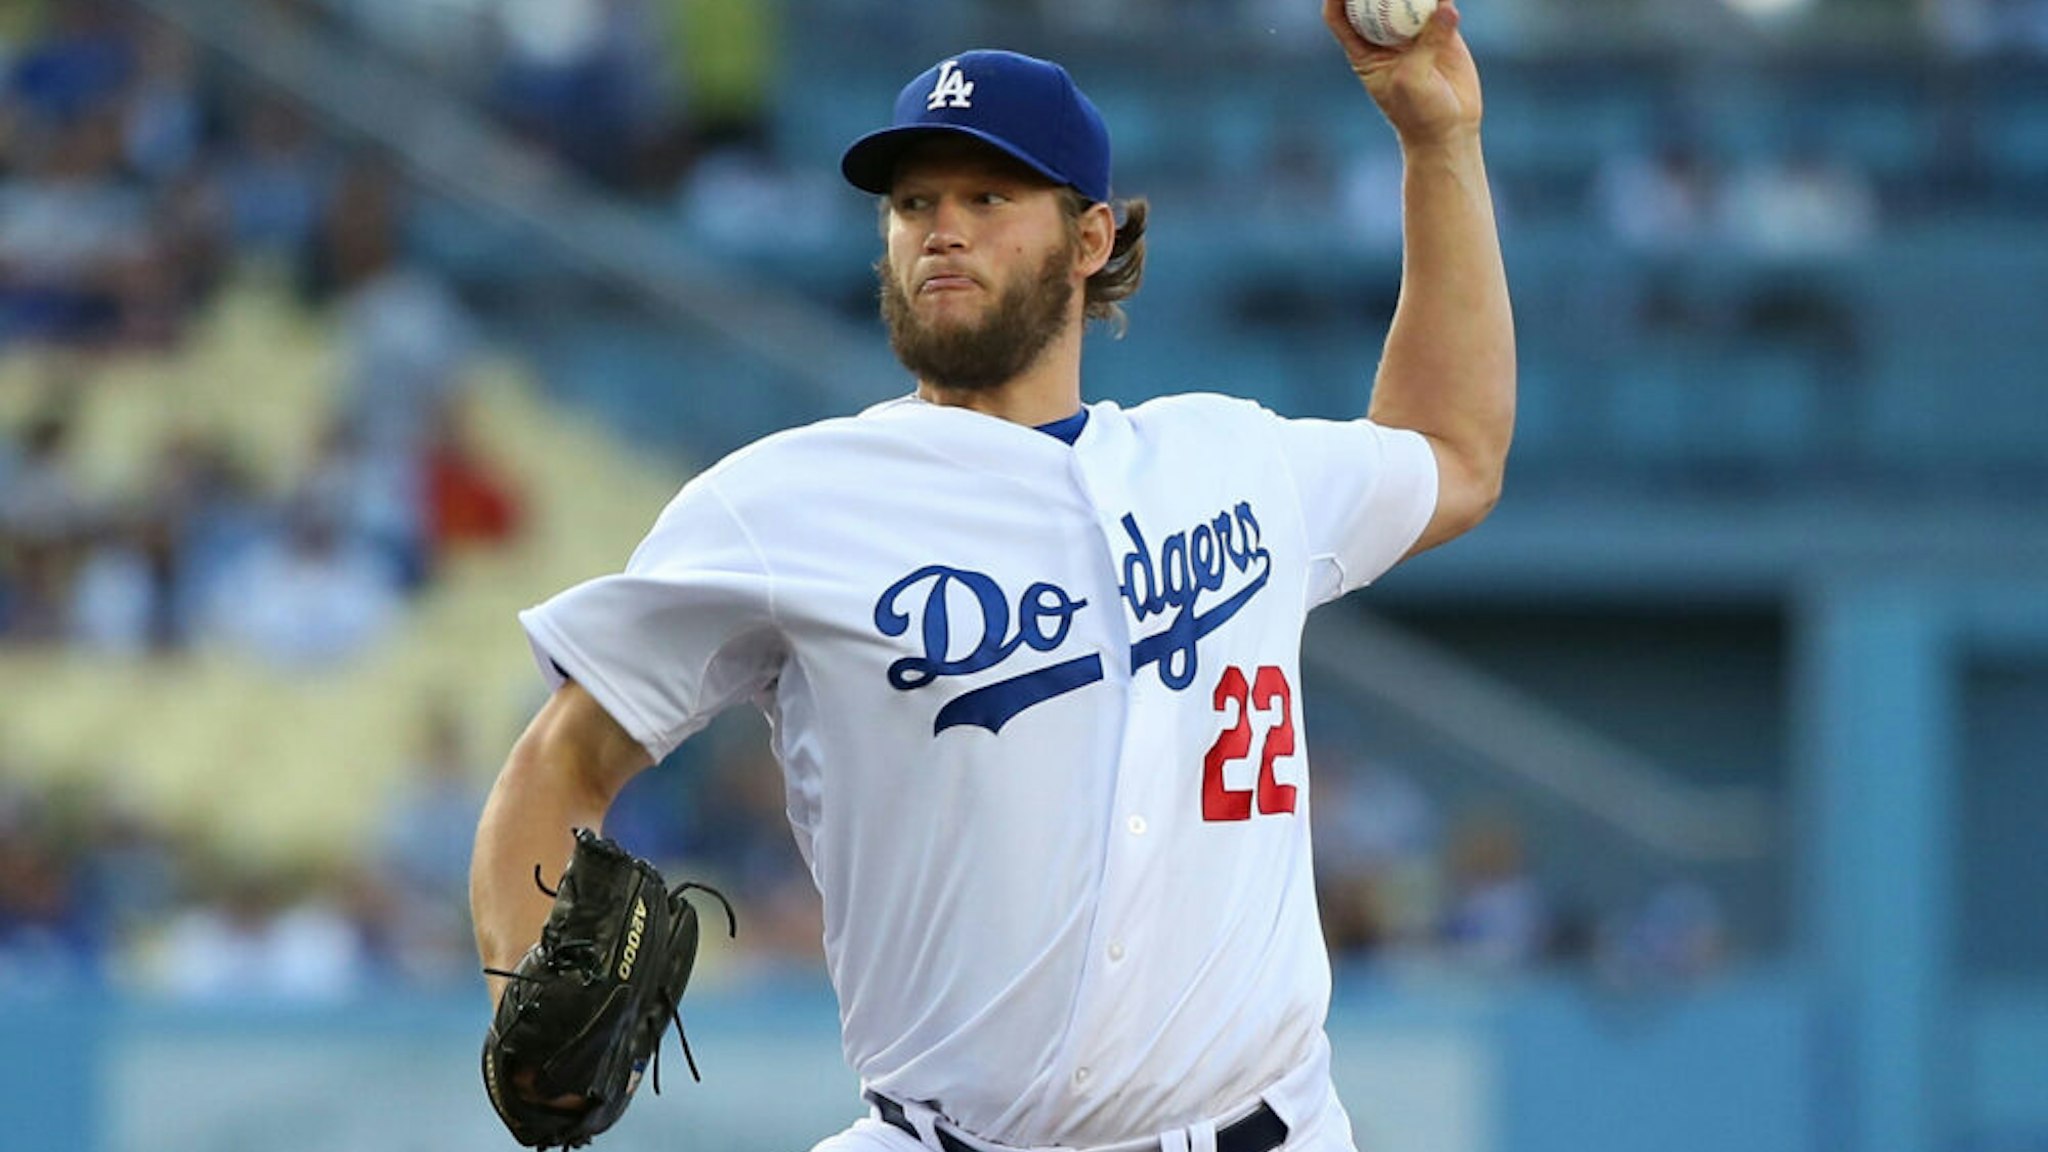 LOS ANGELES, CA - JUNE 18: Pitcher Clayton Kershaw #22 of the Los Angeles Dodgers pitches in the first inning during the MLB game against the Colorado Rockies at Dodger Stadium on June 18, 2014 in Los Angeles, California.